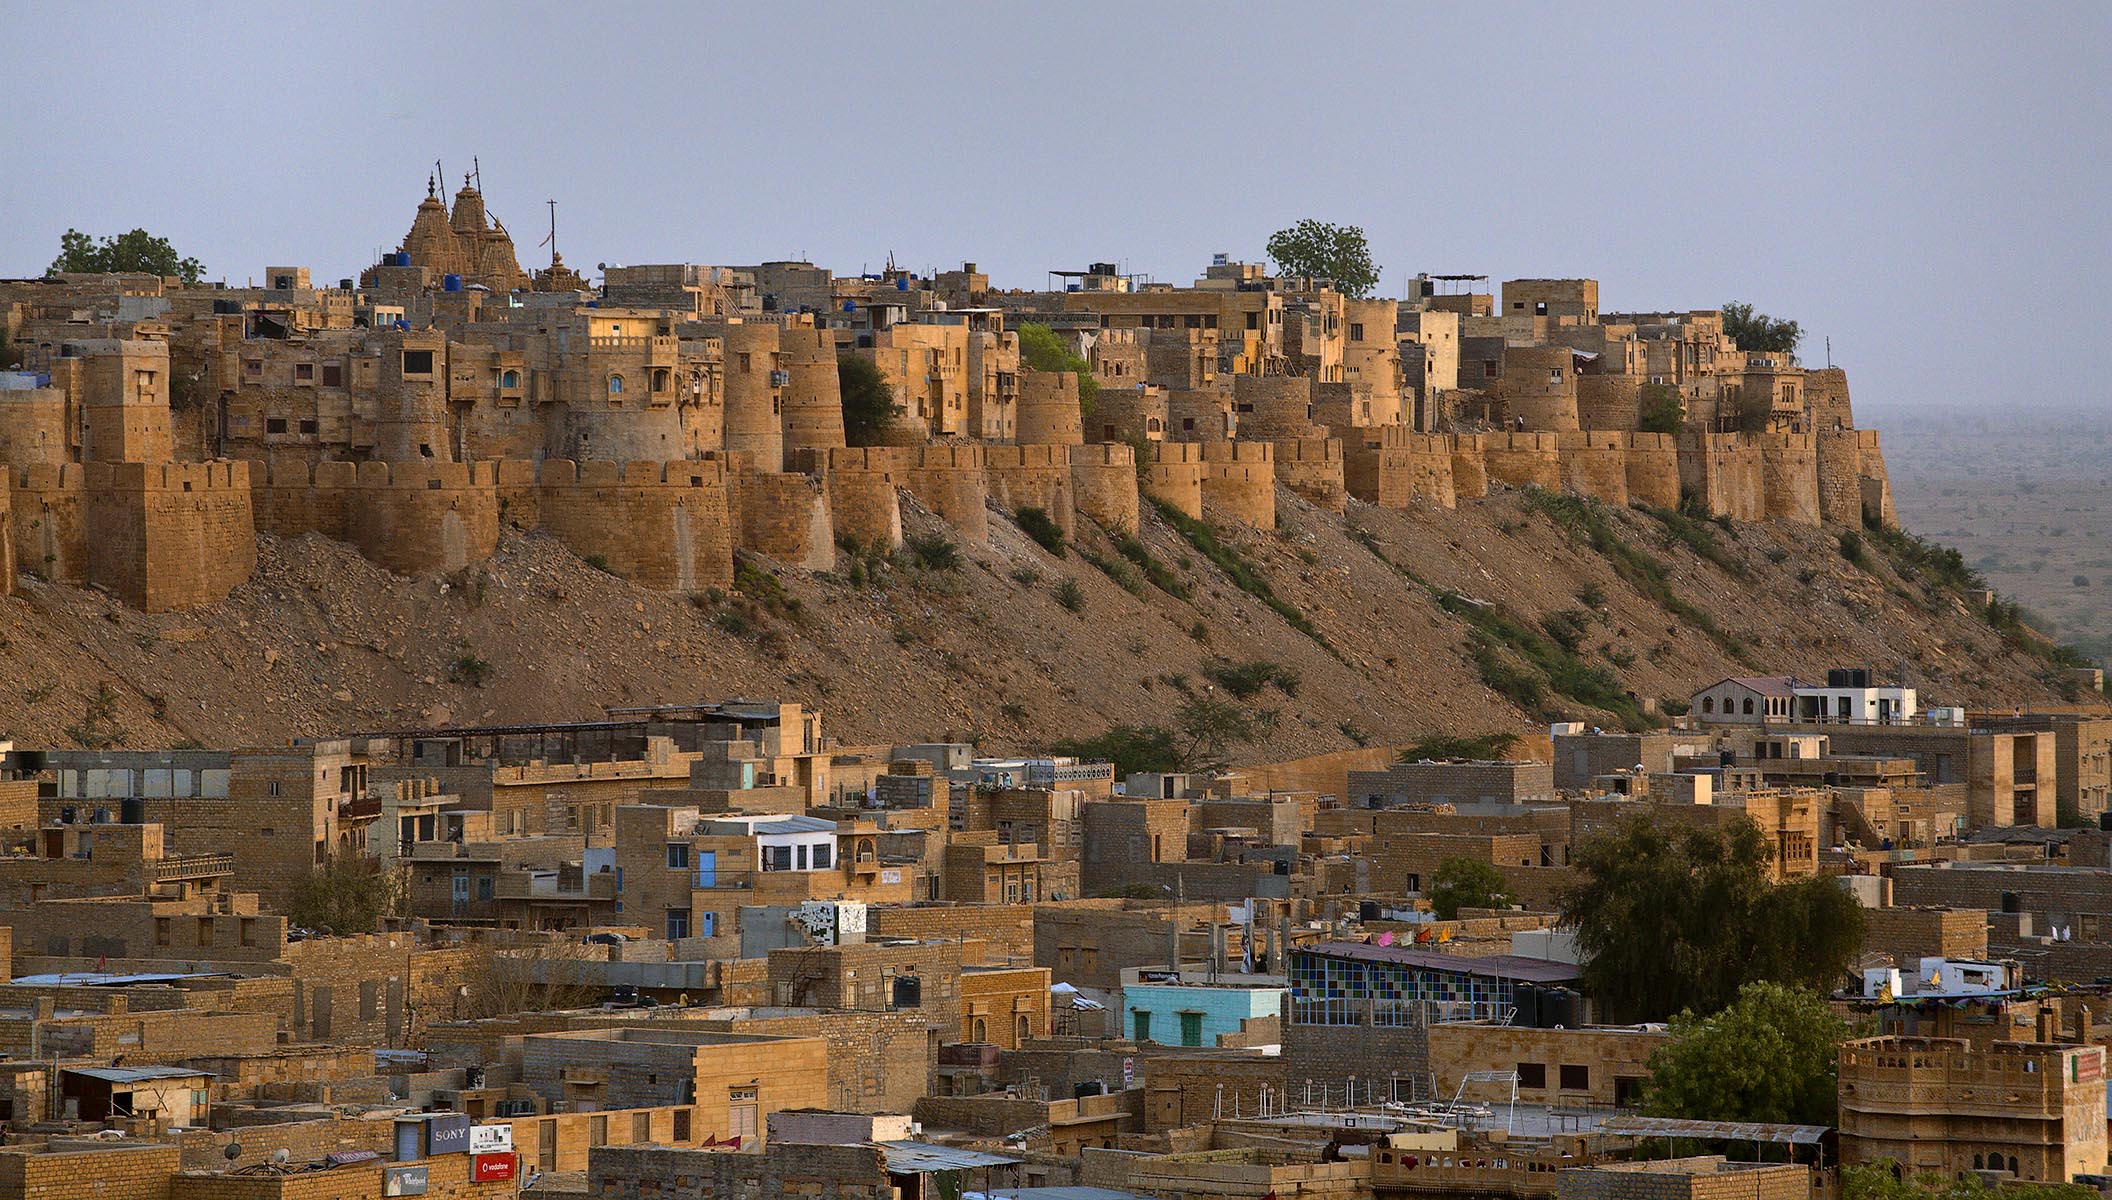 Dusk over the GOLDEN CITY of JAISALMER with JAISALMER FORT and its 99 bastions which was built in 1156 on TRIKUTA HILL - RAJASTHAN, INDIA